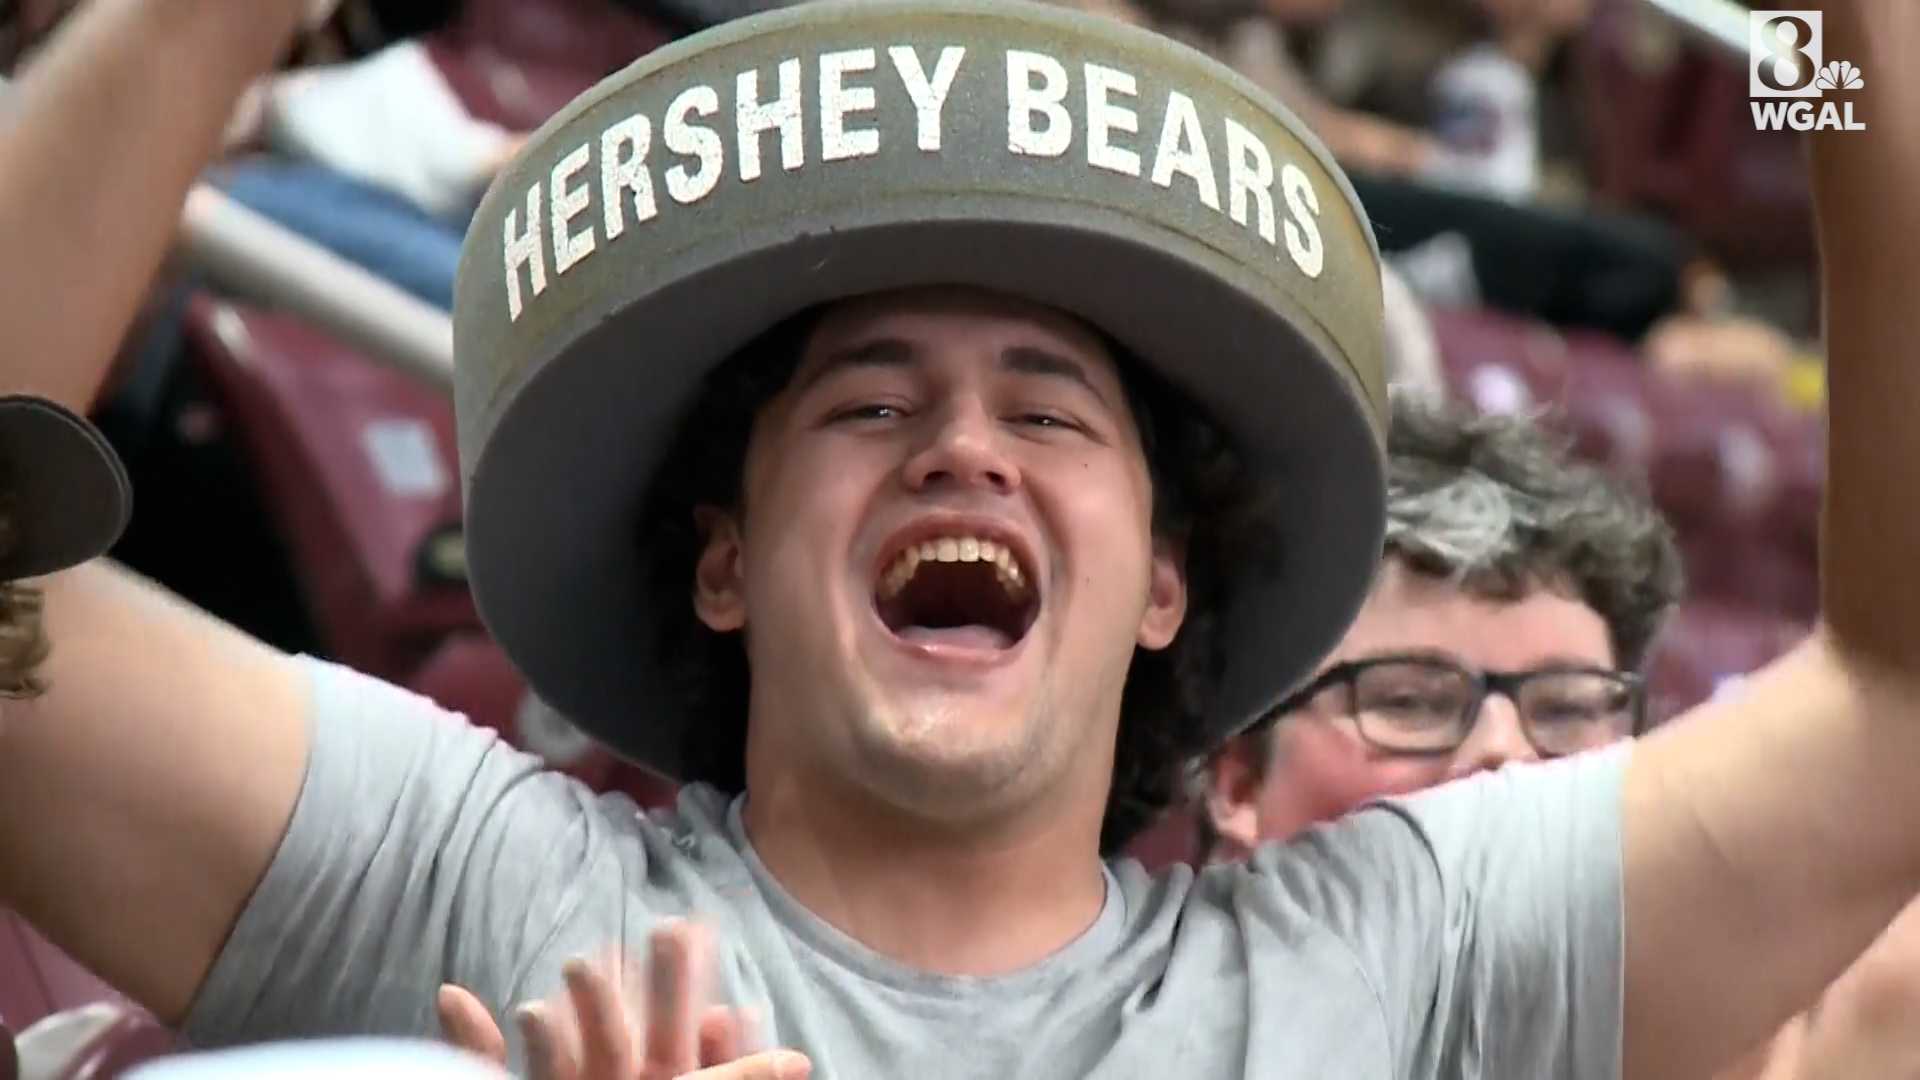 Hershey Bears game preview for Game 7